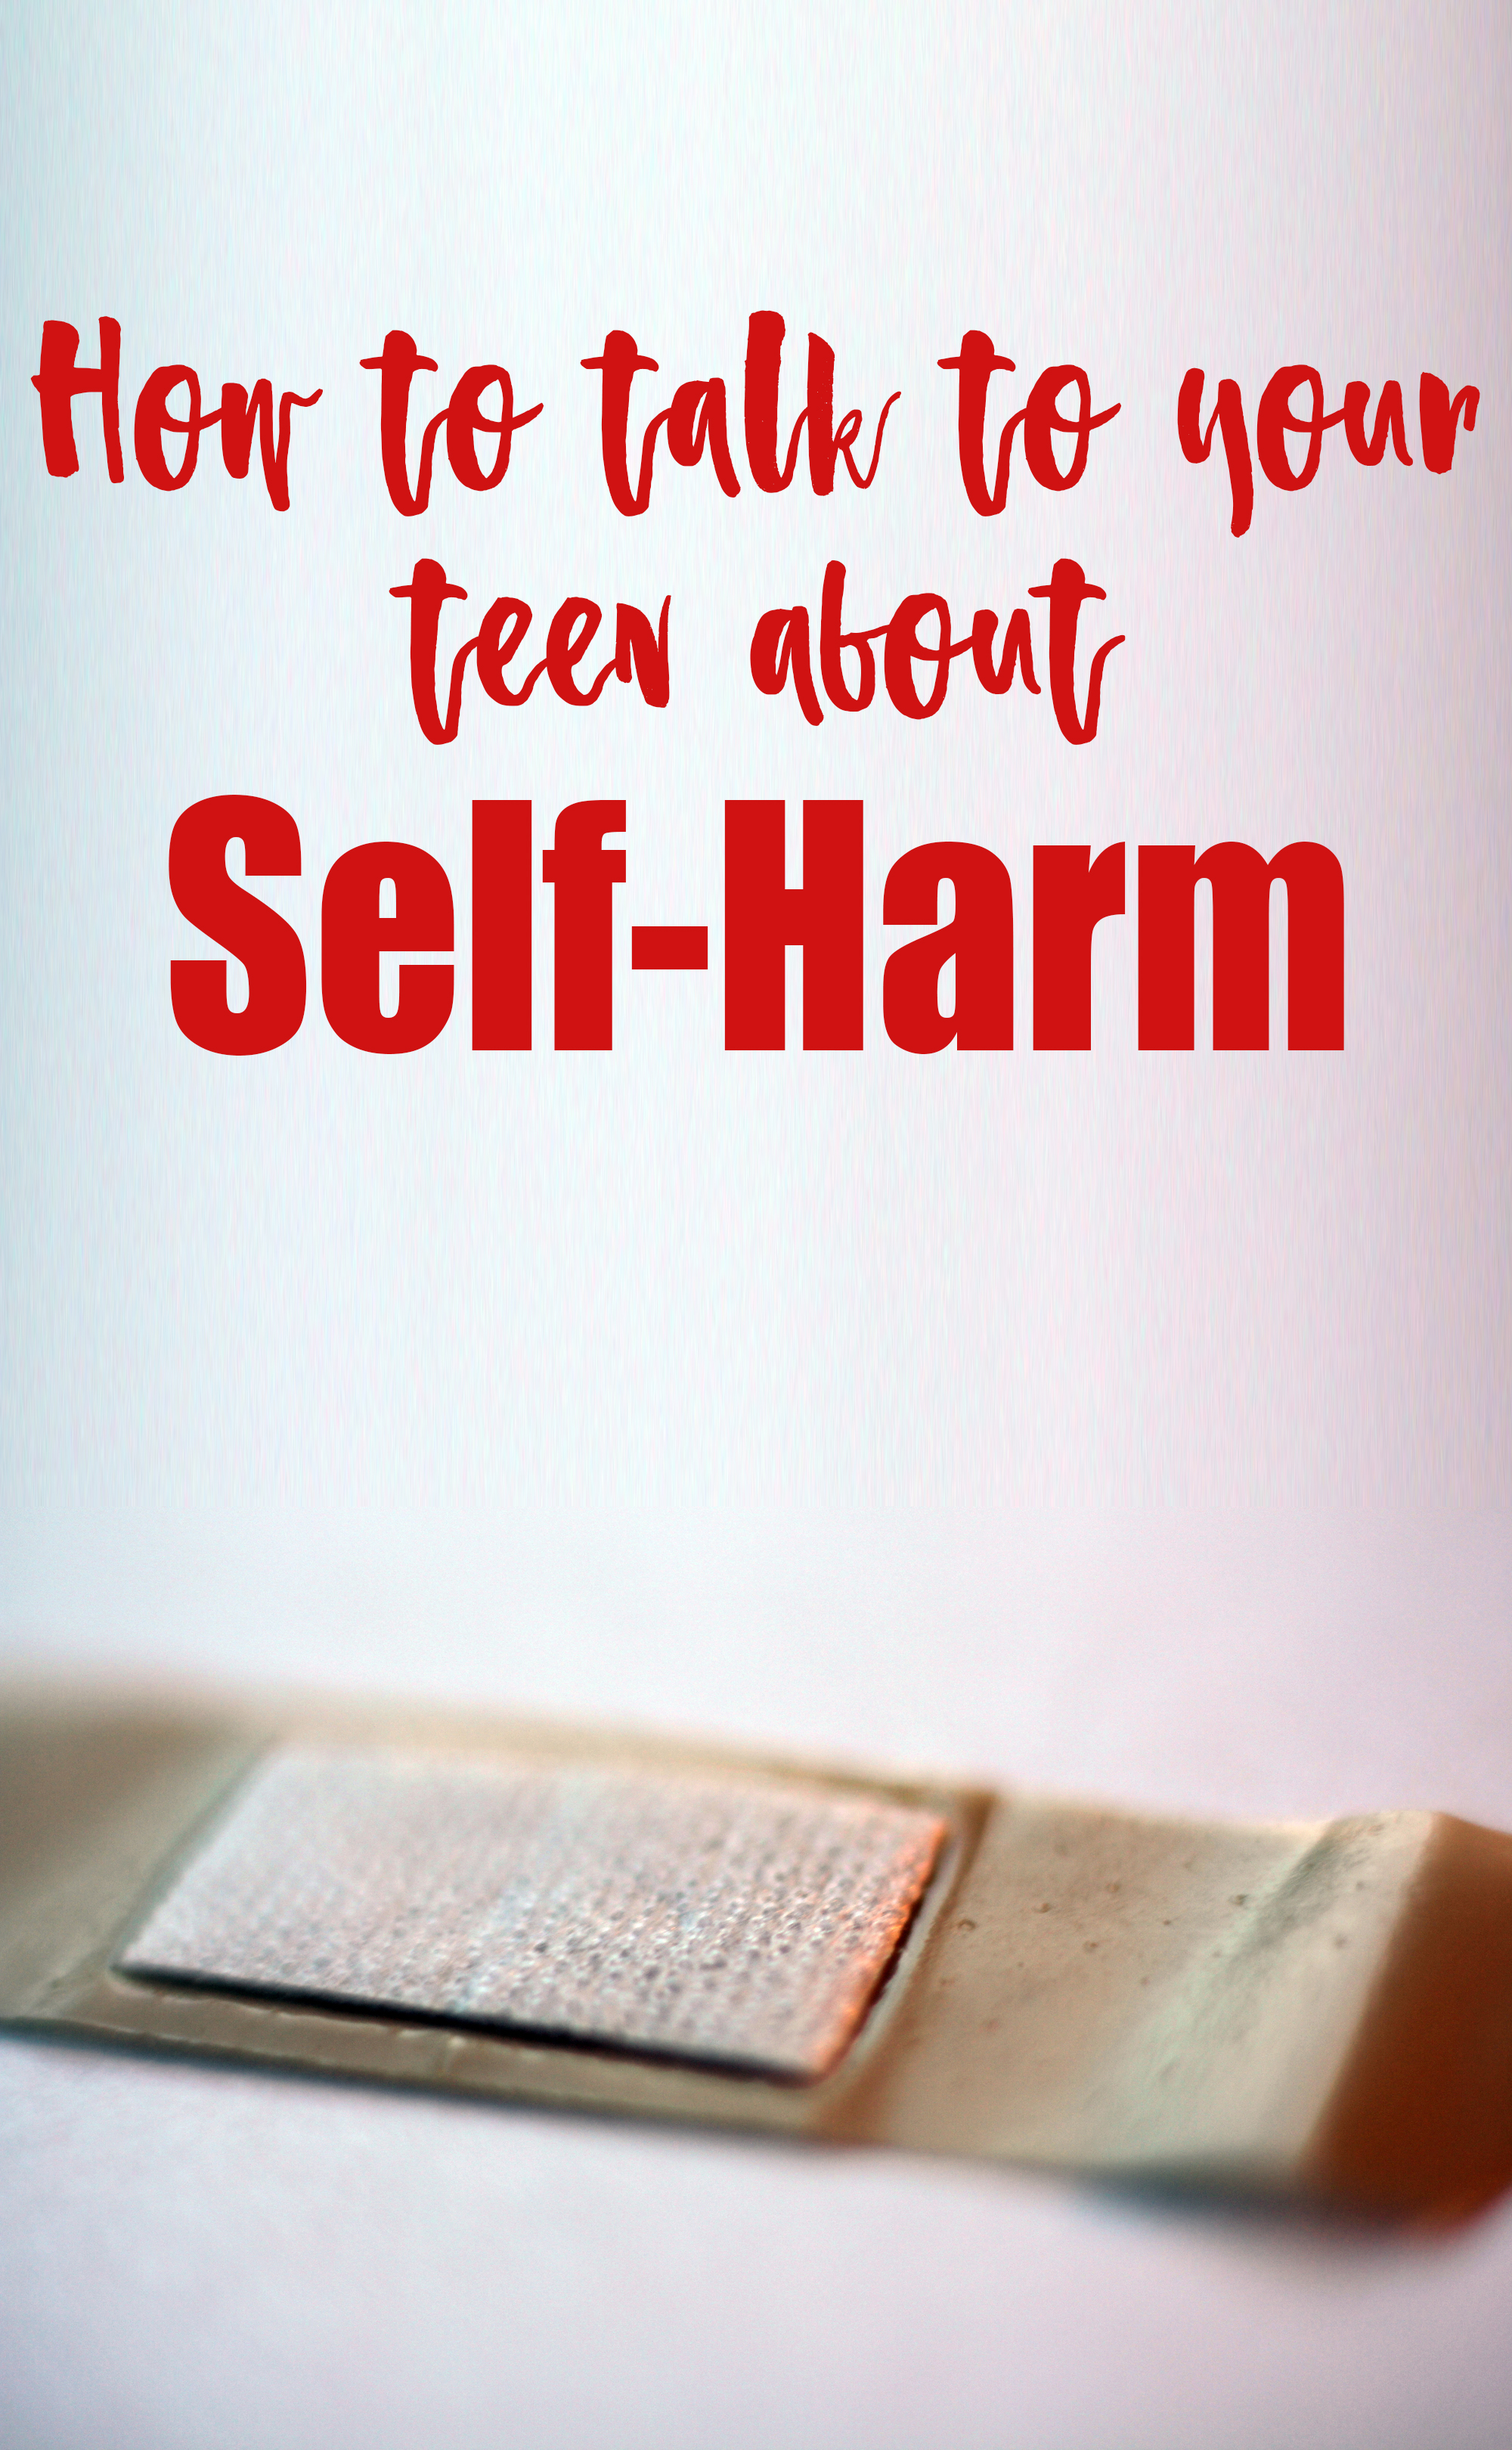 How do you approach the topic of self-harm with your teen? Here are some tips for starting the conversation and helping your teen out of crisis. Please note content may be triggering for some.